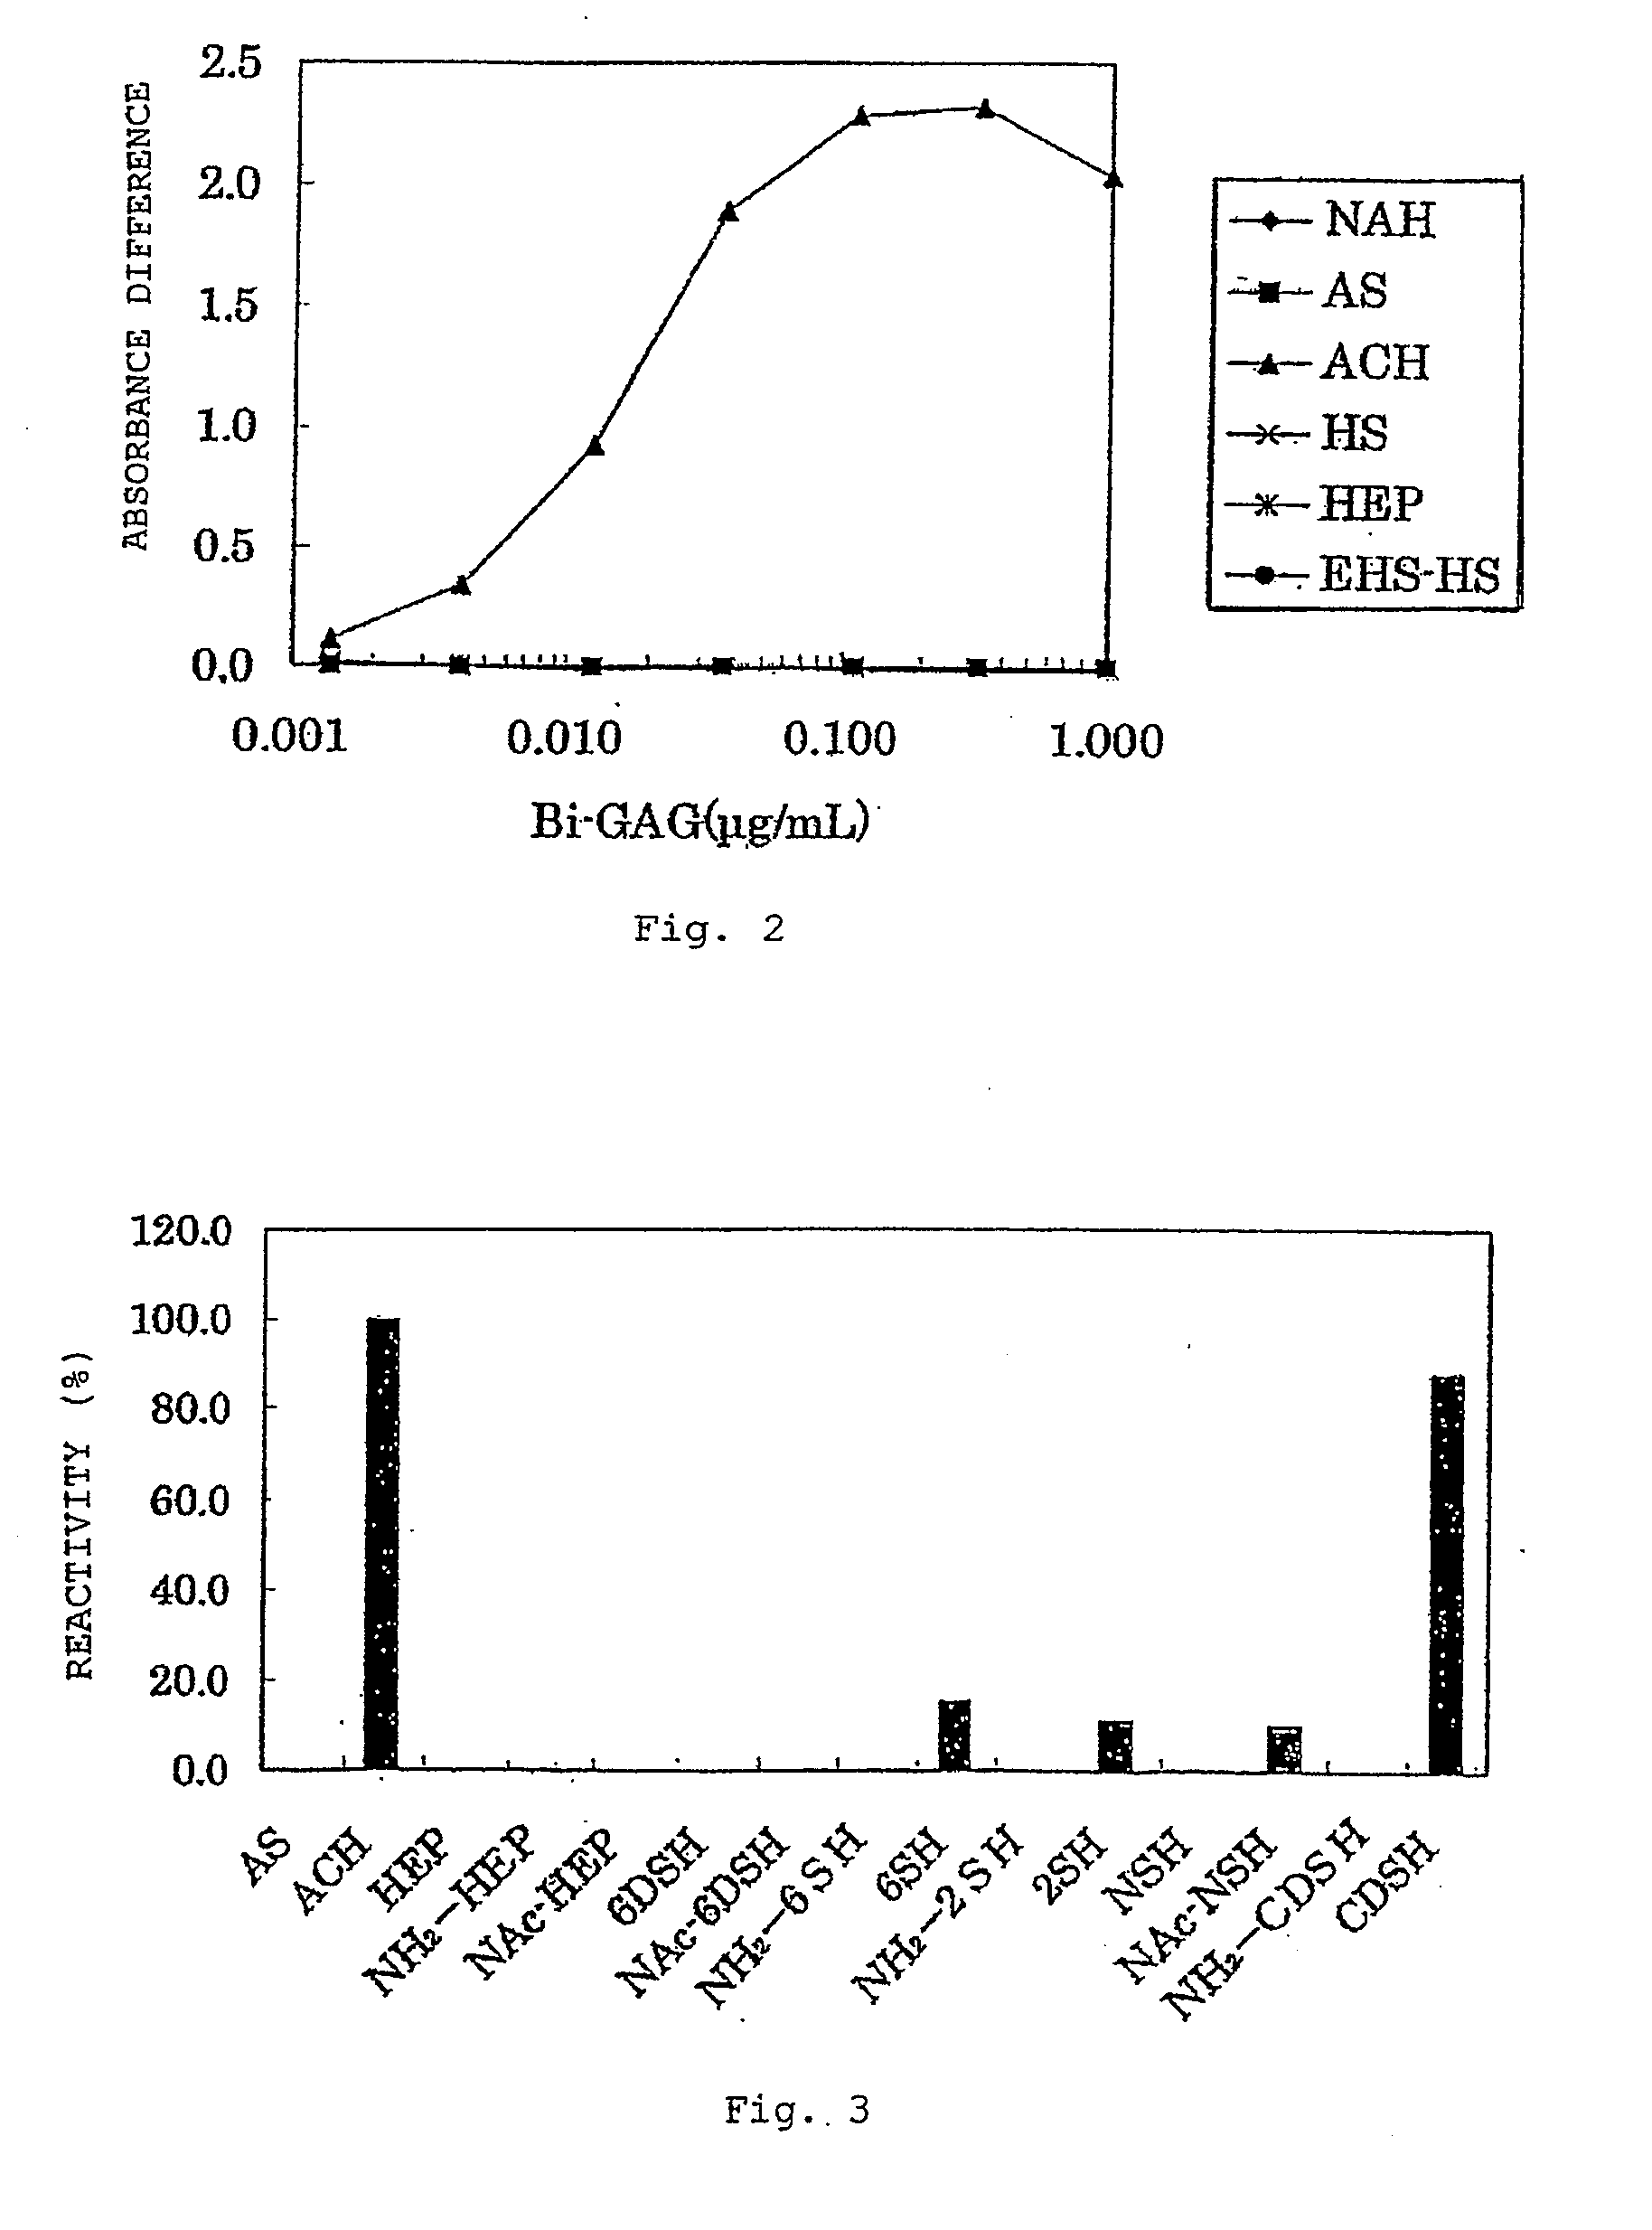 Anti-2-o-desulfated acharan sulfate antibody and its application